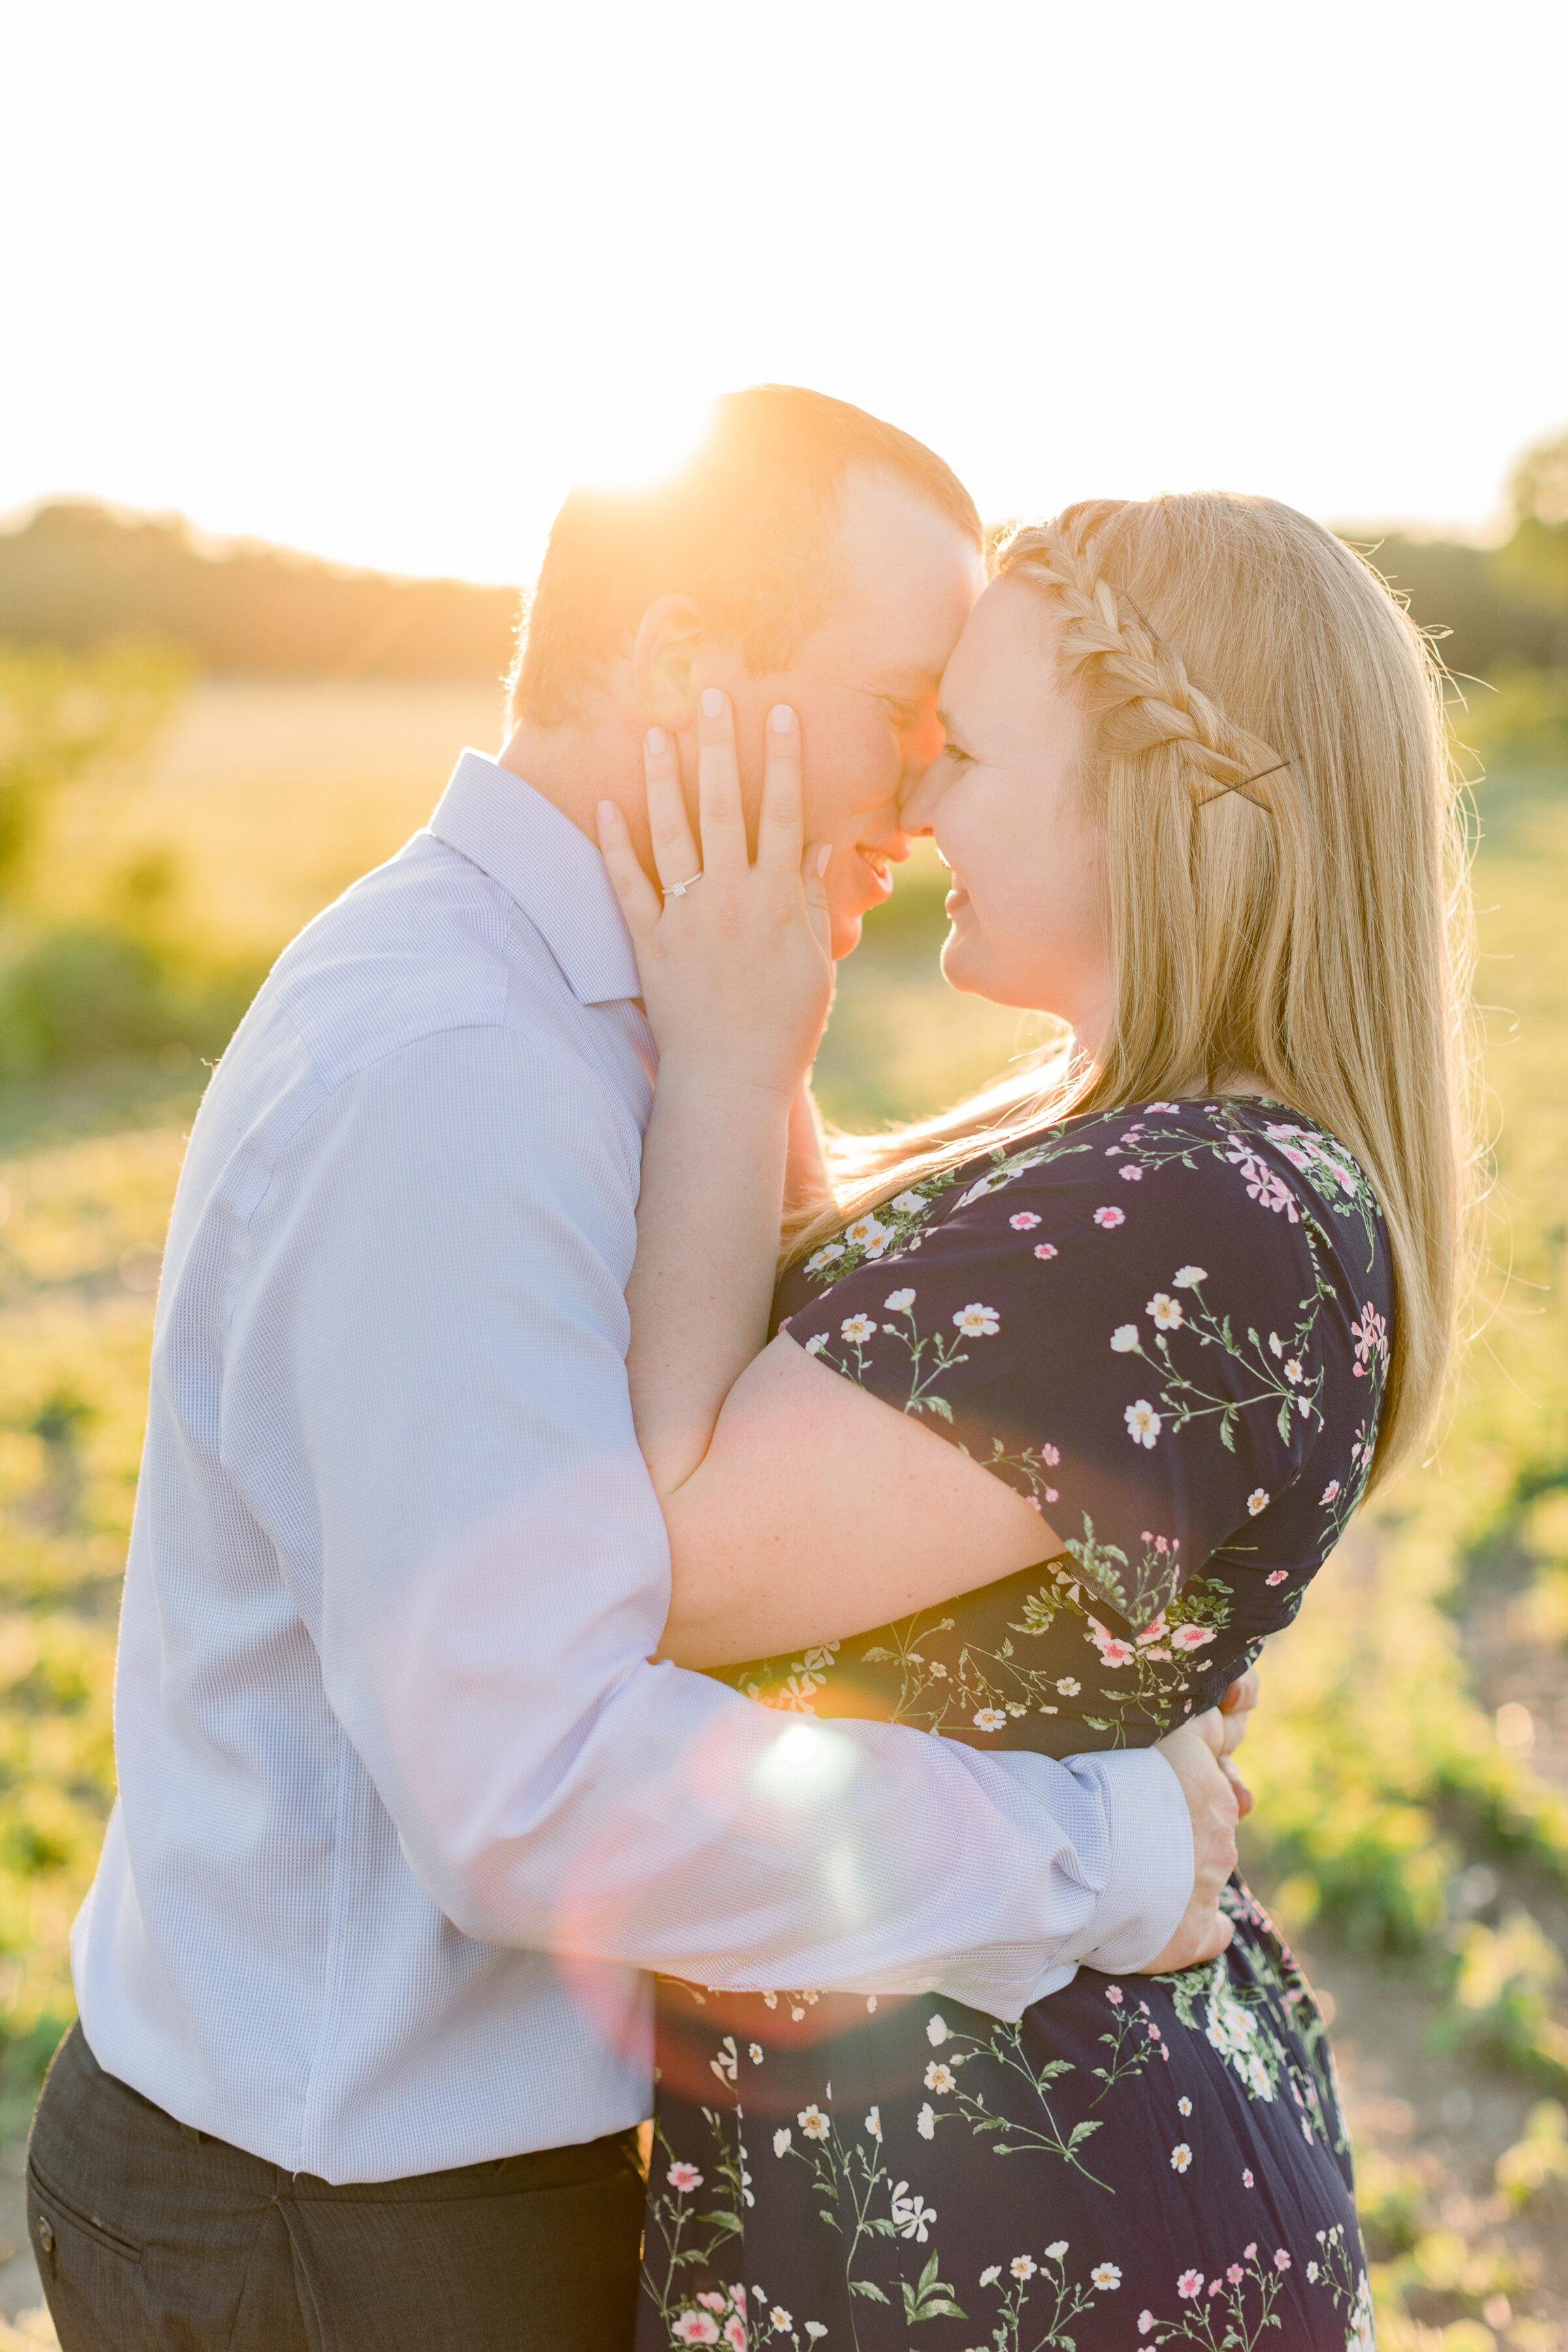  A romantic kiss between husband and wife in a beautiful engagement session on the farm by Chelsea Mason Photography. Summer engagement session inspiration ideas and goals couple goals couple pose inspiration client attire inspiration for semi formal